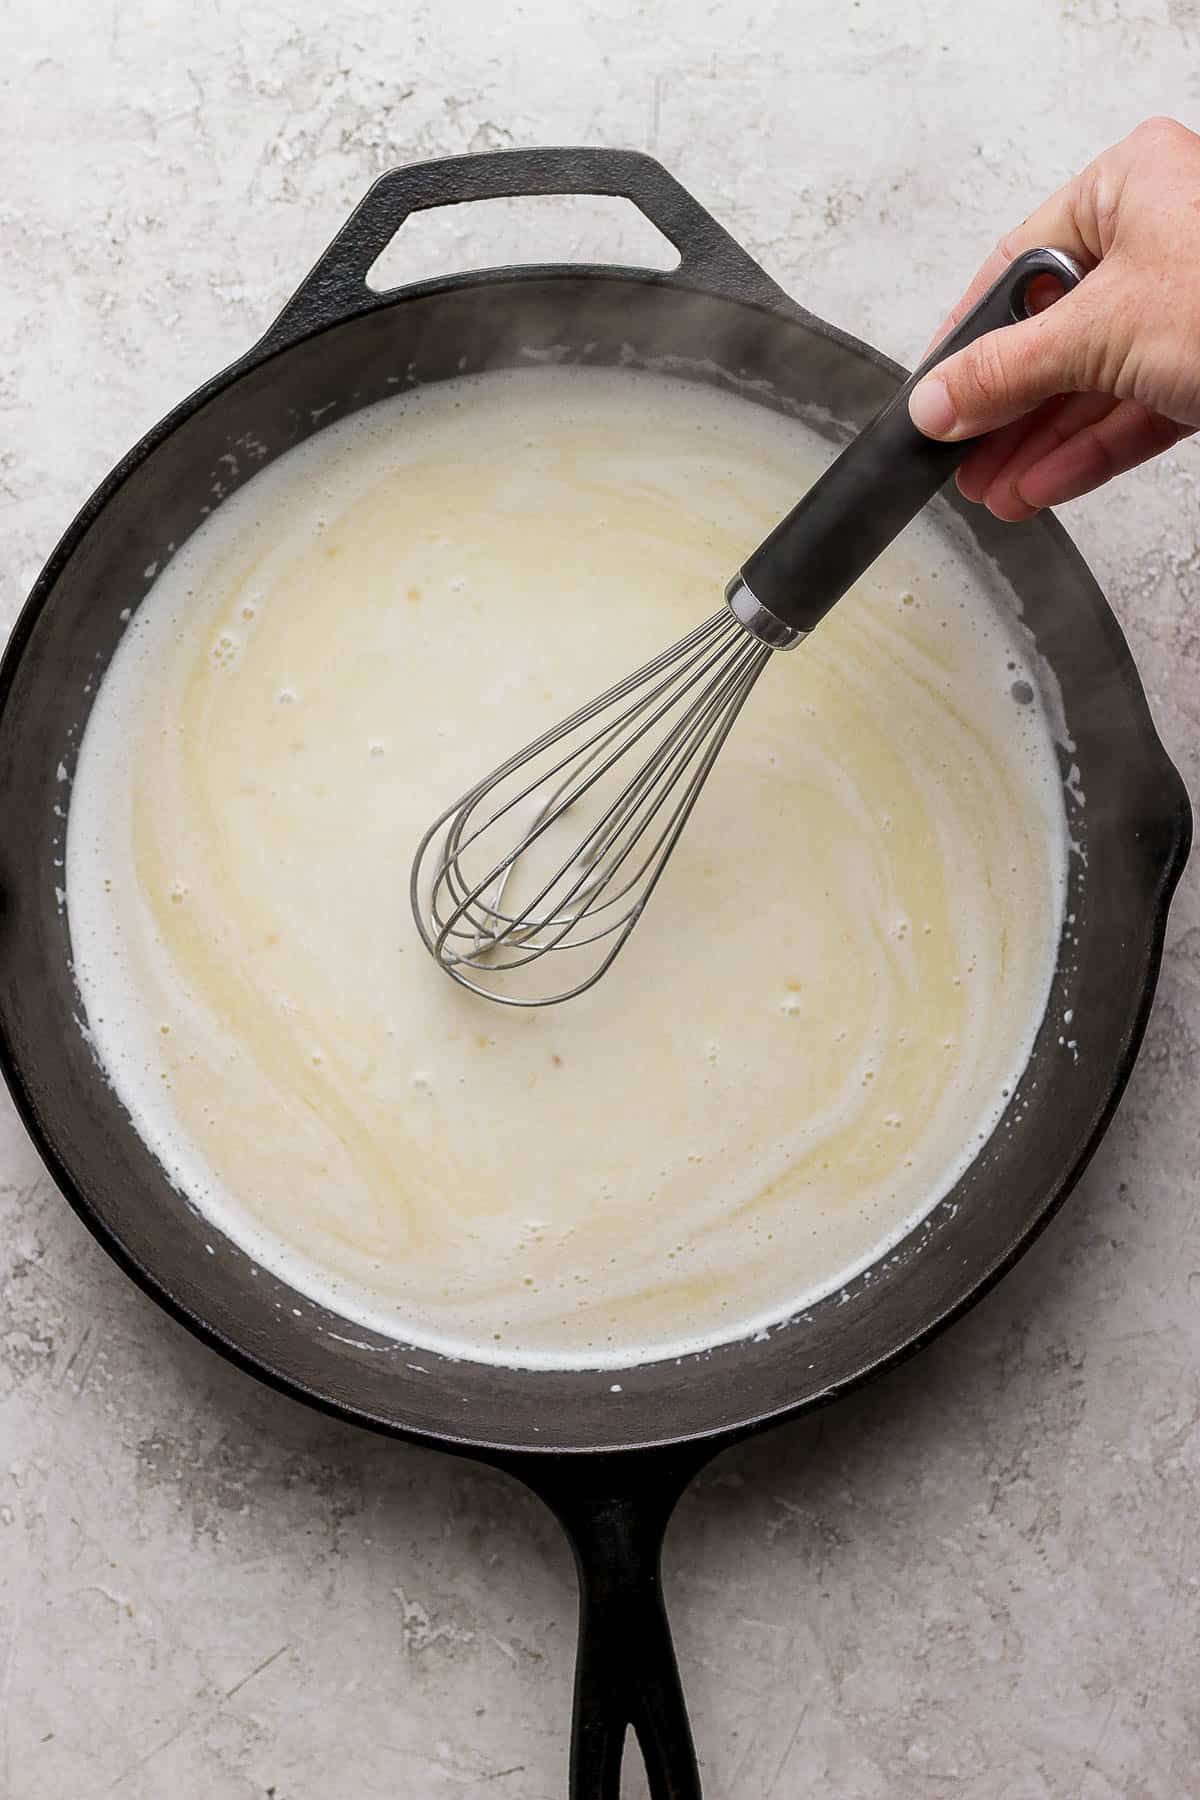 A whisk mixing the cream and seasonings into the butter and garlic.